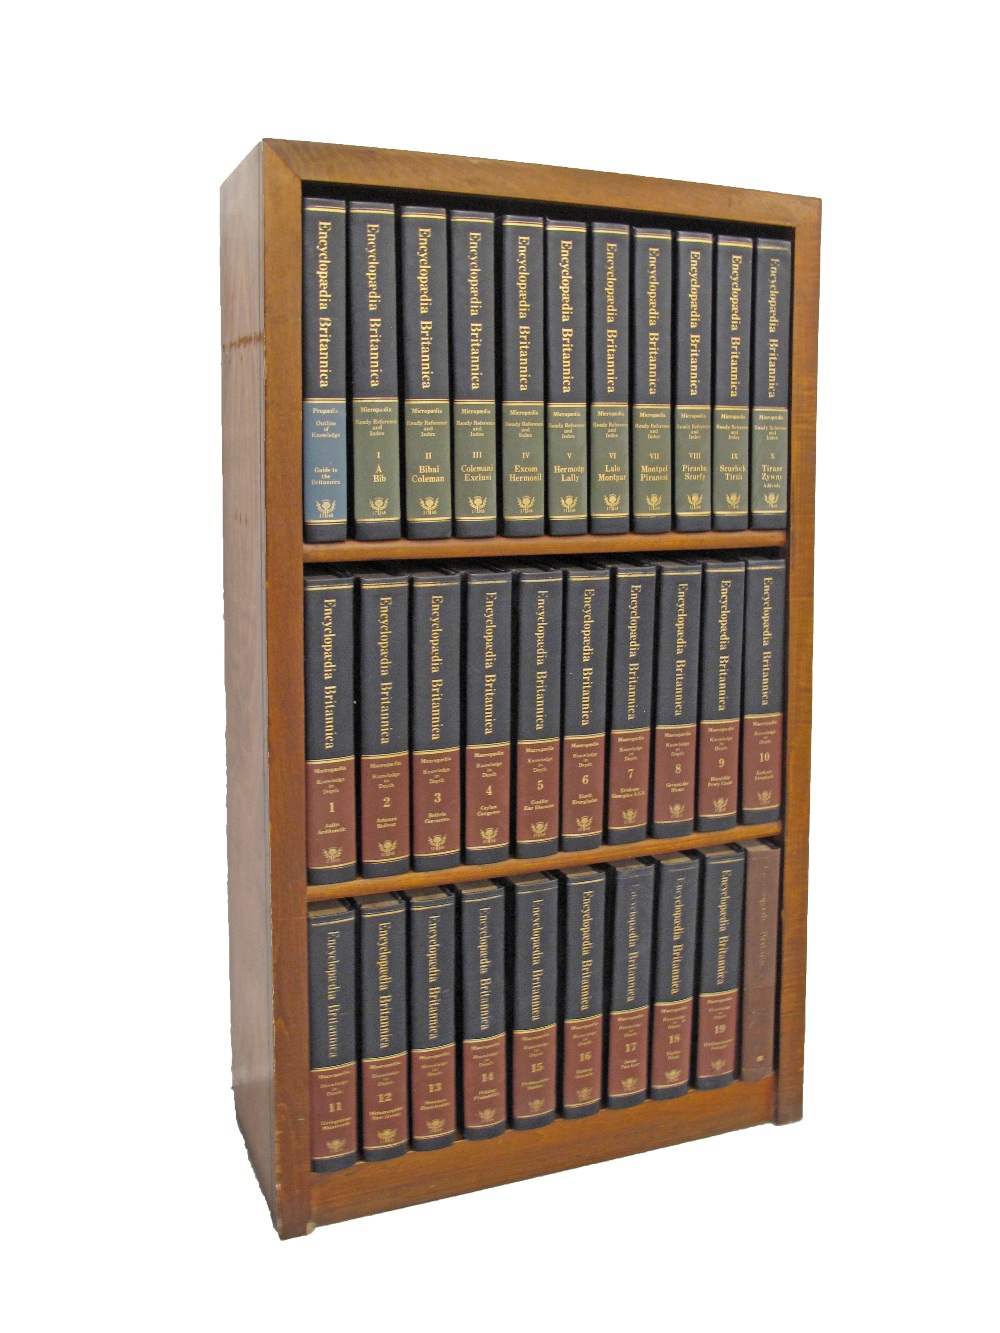 A three shelf bookcase containing 31 volumes of Encyclopaedia Britannica, 15th Edition, leather